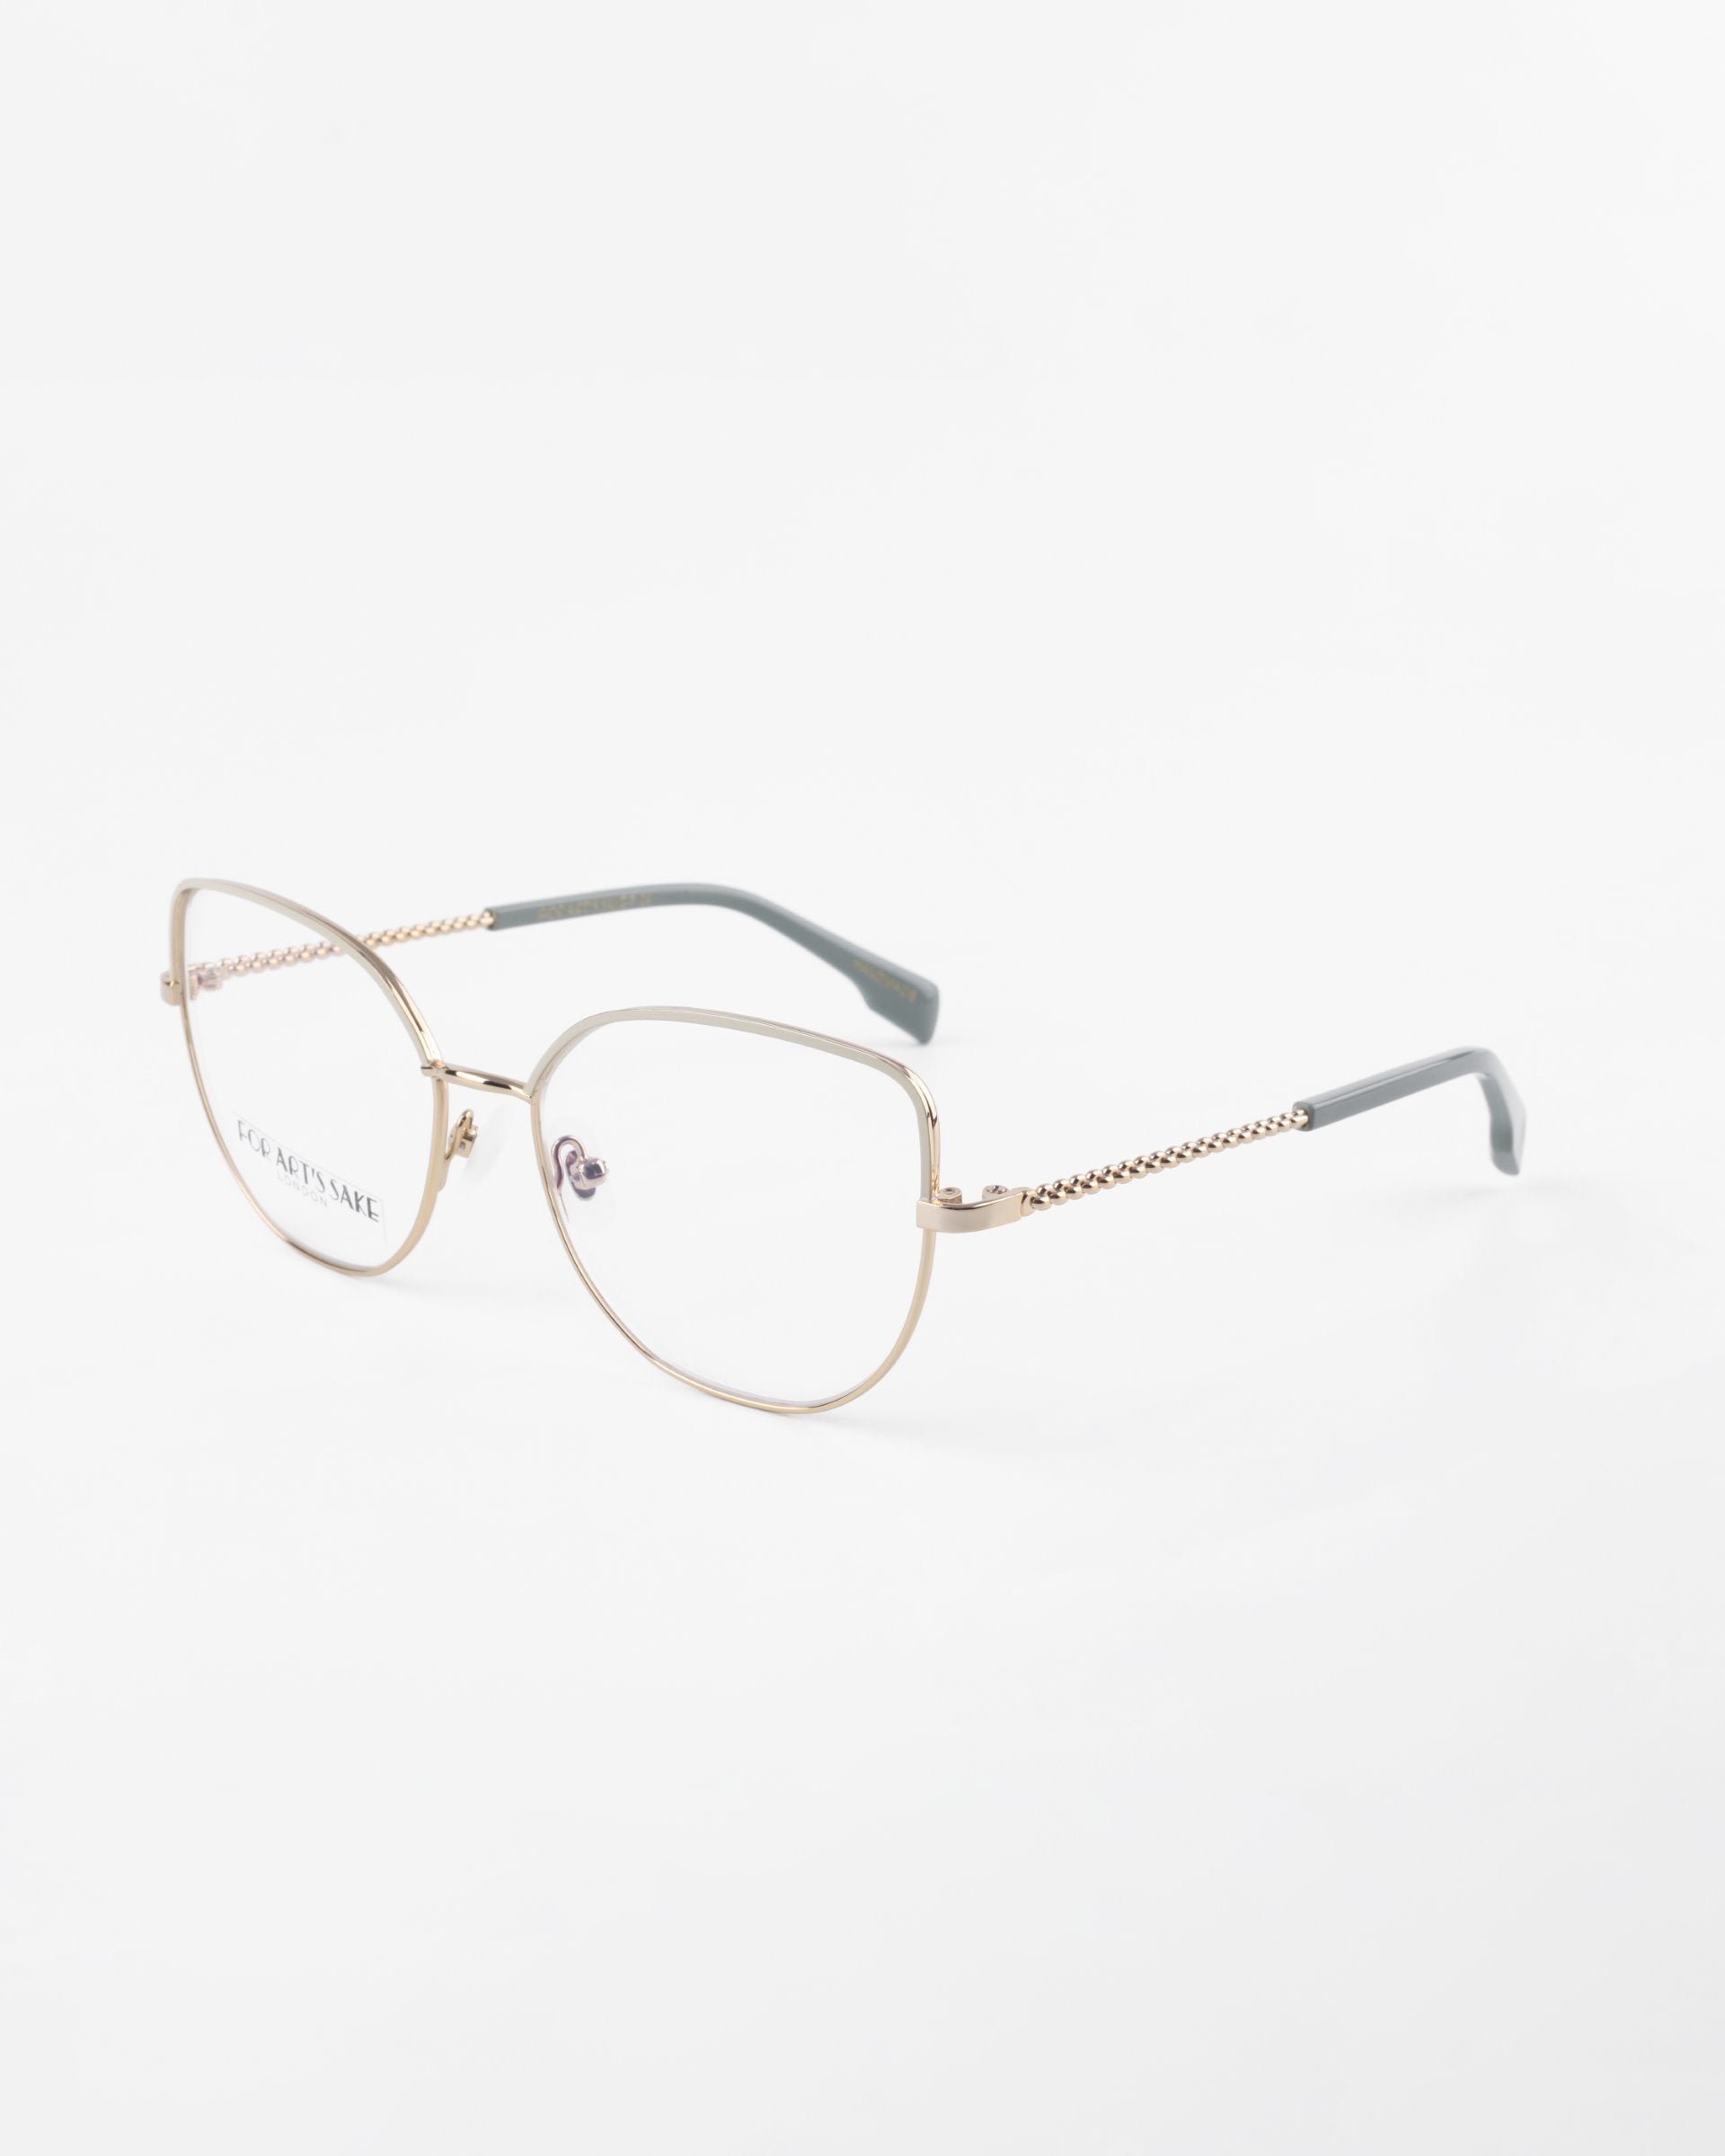 A pair of stylish For Art&#39;s Sake® Ophelia eyeglasses with thin, metallic gold frames and clear lenses. The arms of the glasses are gray and feature a subtle braided design near the hinges. The white background highlights the elegant and minimalist design of the eyewear, which also offers a blue light filter option for added protection.